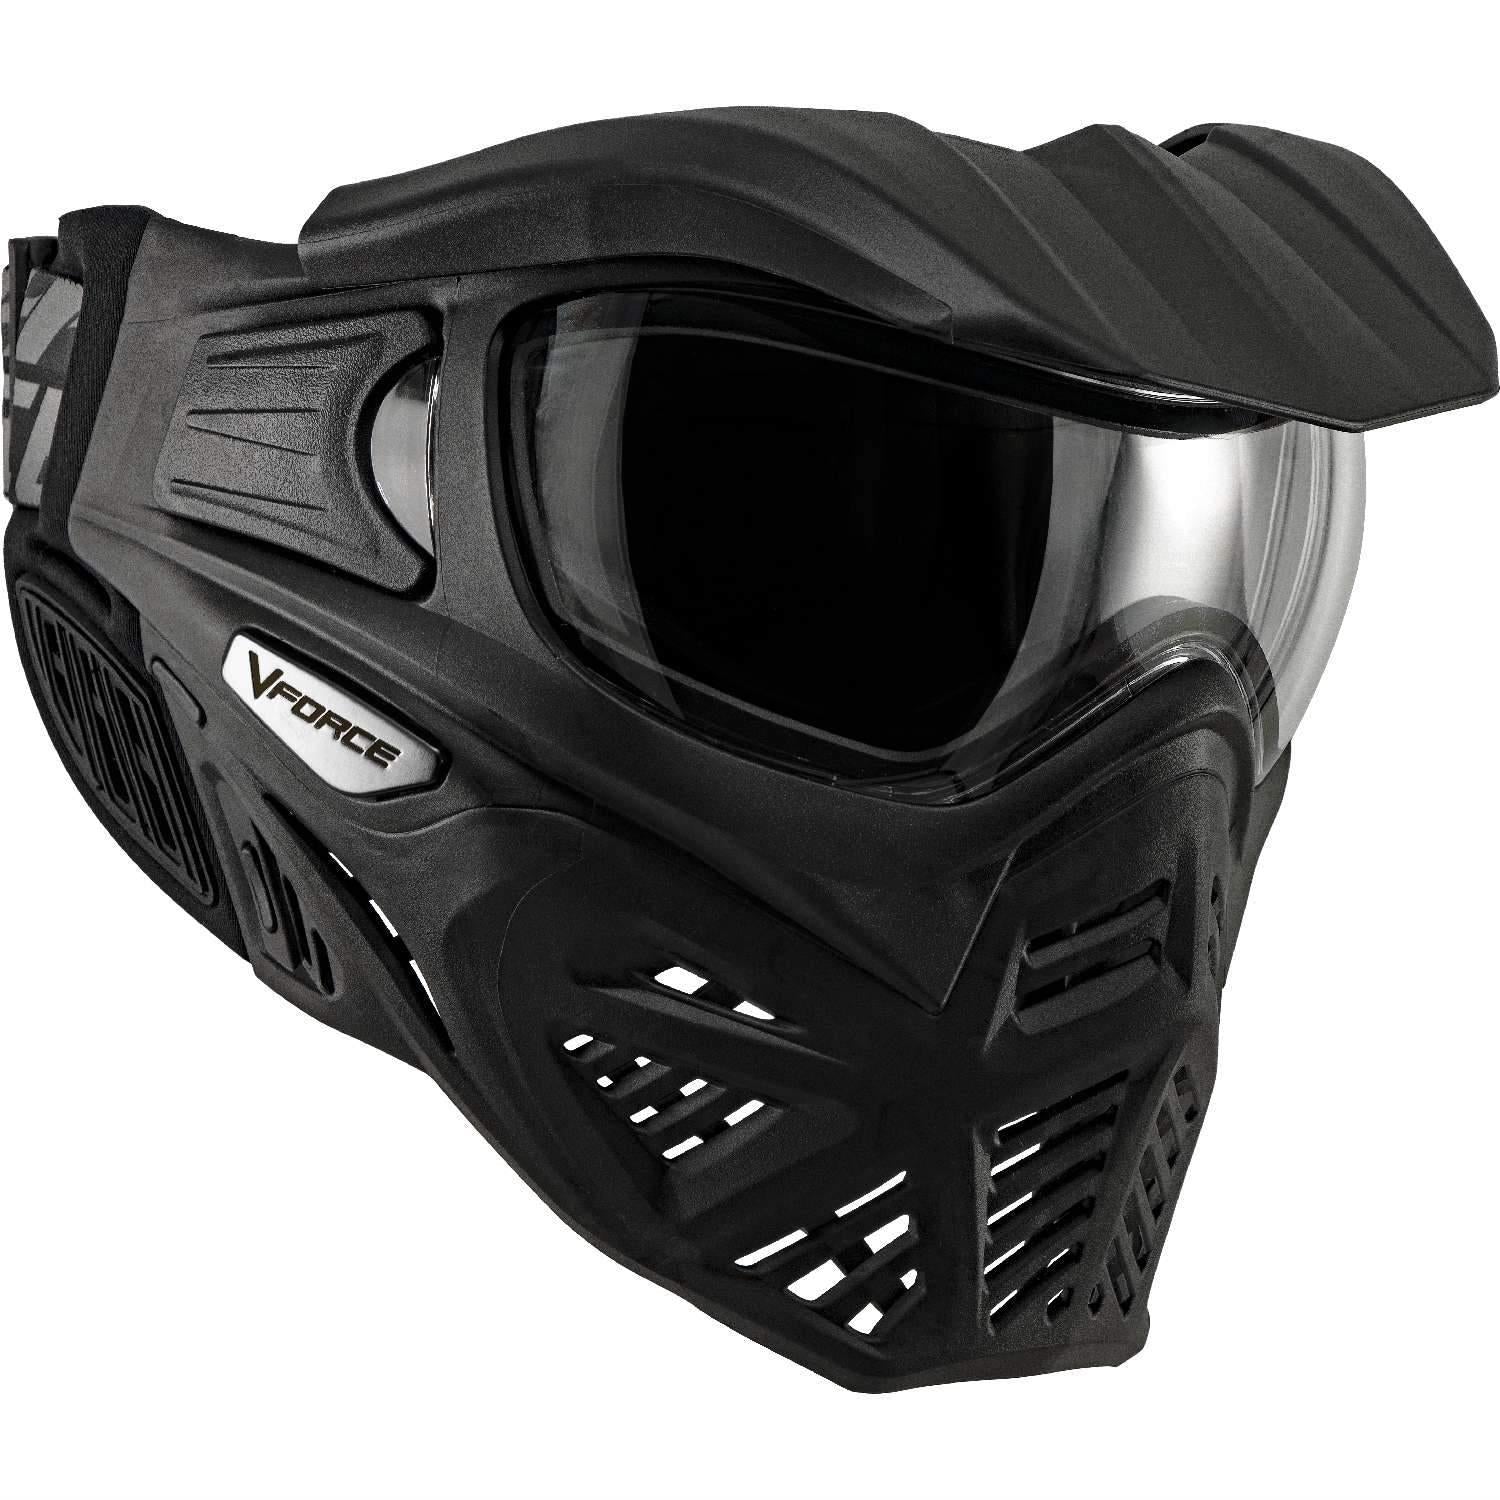 VForce Grill 2.0 Thermal Paintball Mask Goggles - Black / Black V-Force